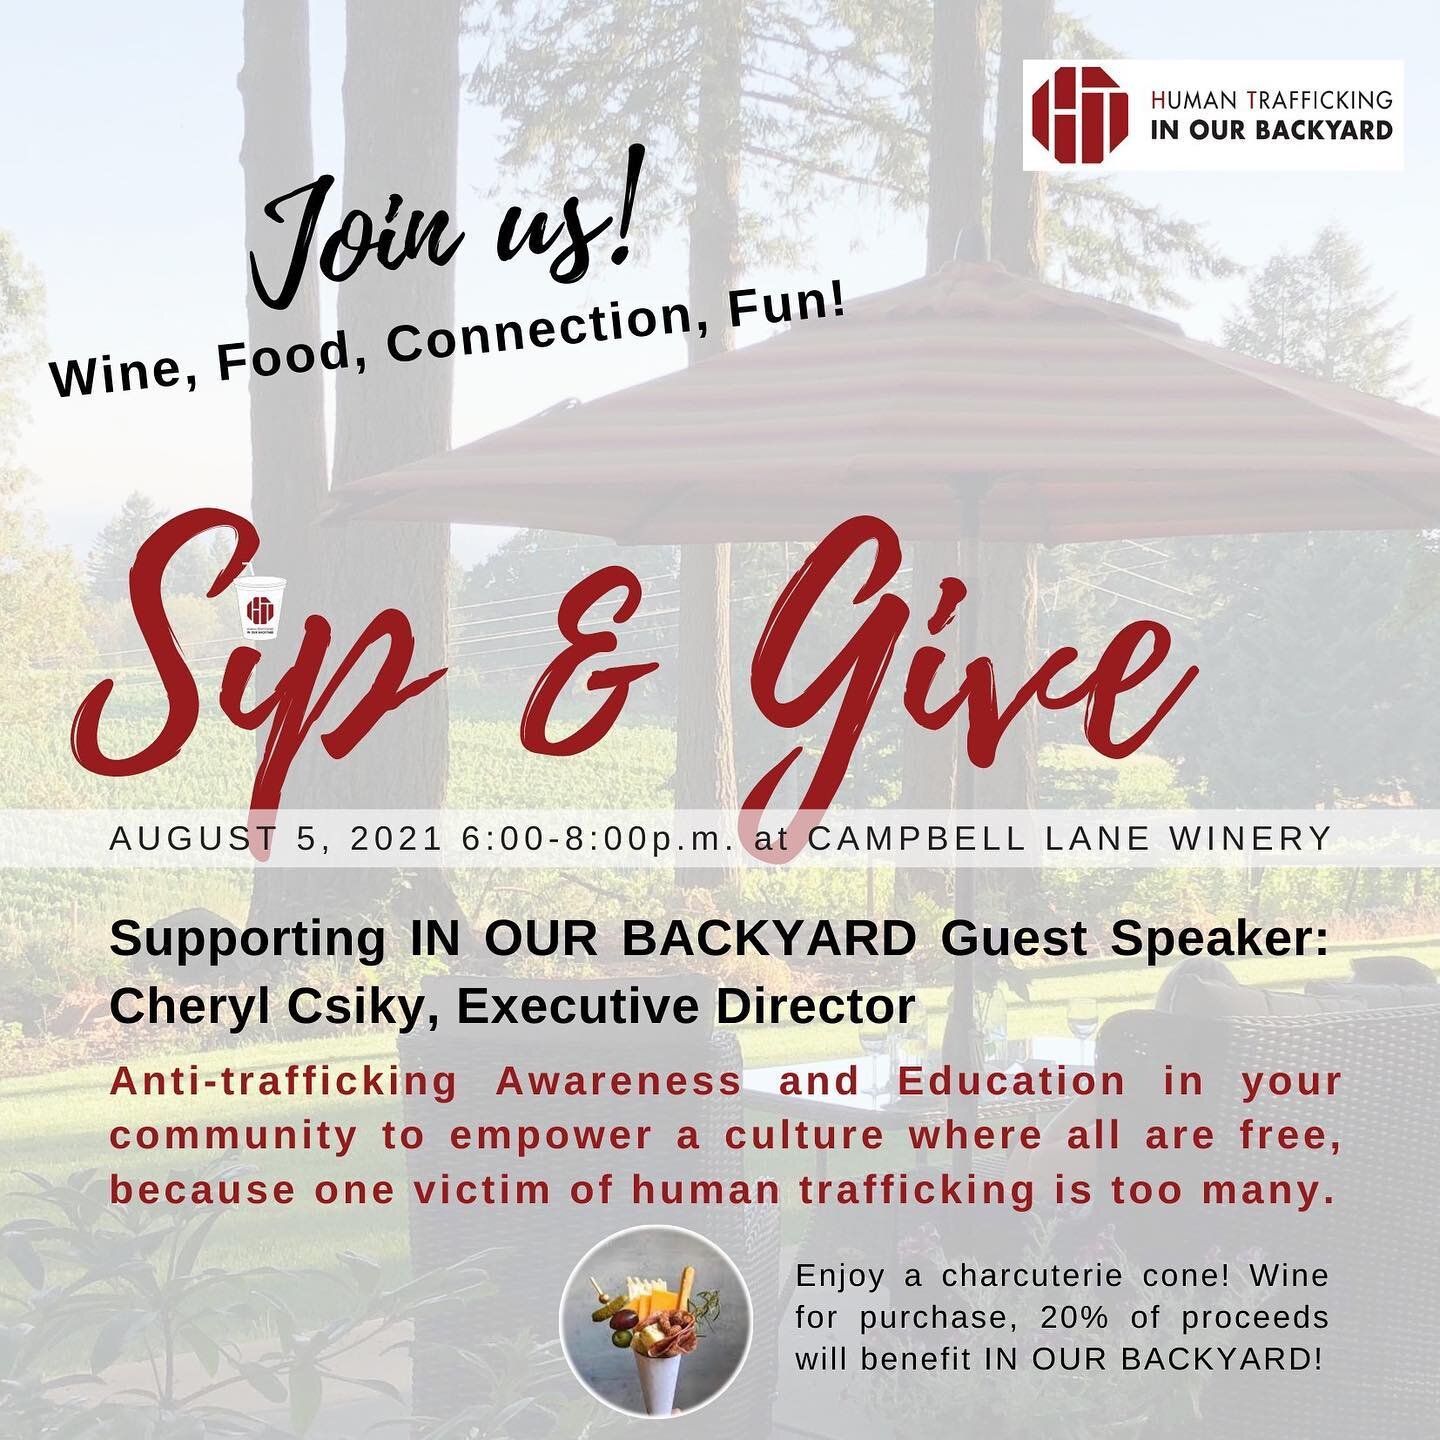 We are excited to host a Sip and Give fundraiser for In Our Backyard August 5, which works to combat human trafficking. You can learn more and sign up by tapping the link in our bio.